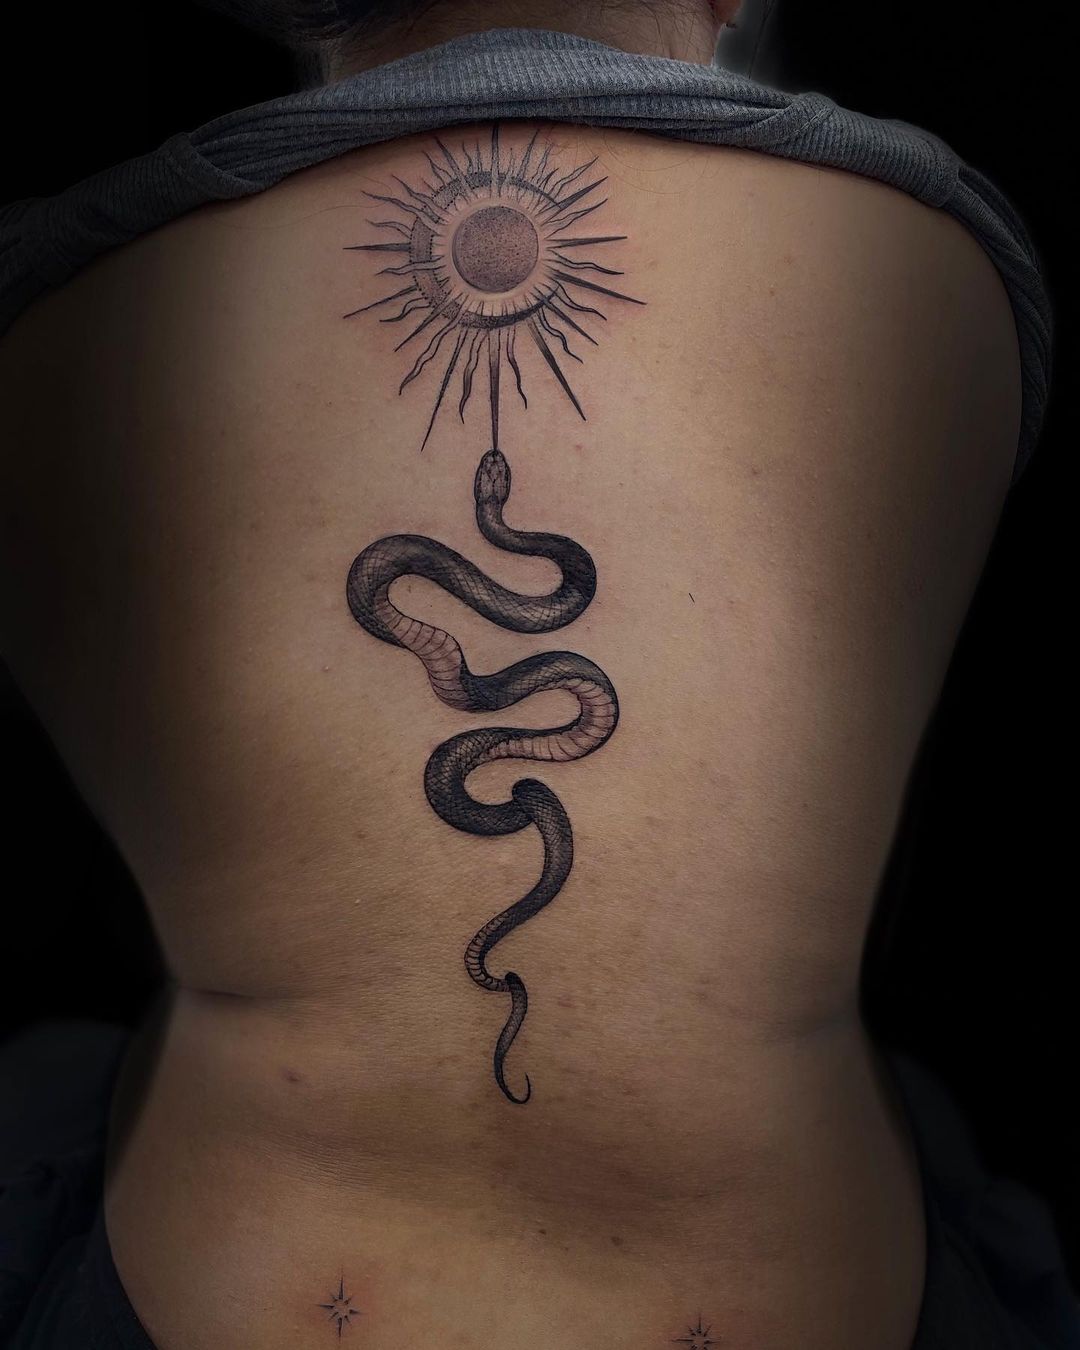 How Much Is a Spine Tattoo? A Comprehensive Guide to Prices and Factors